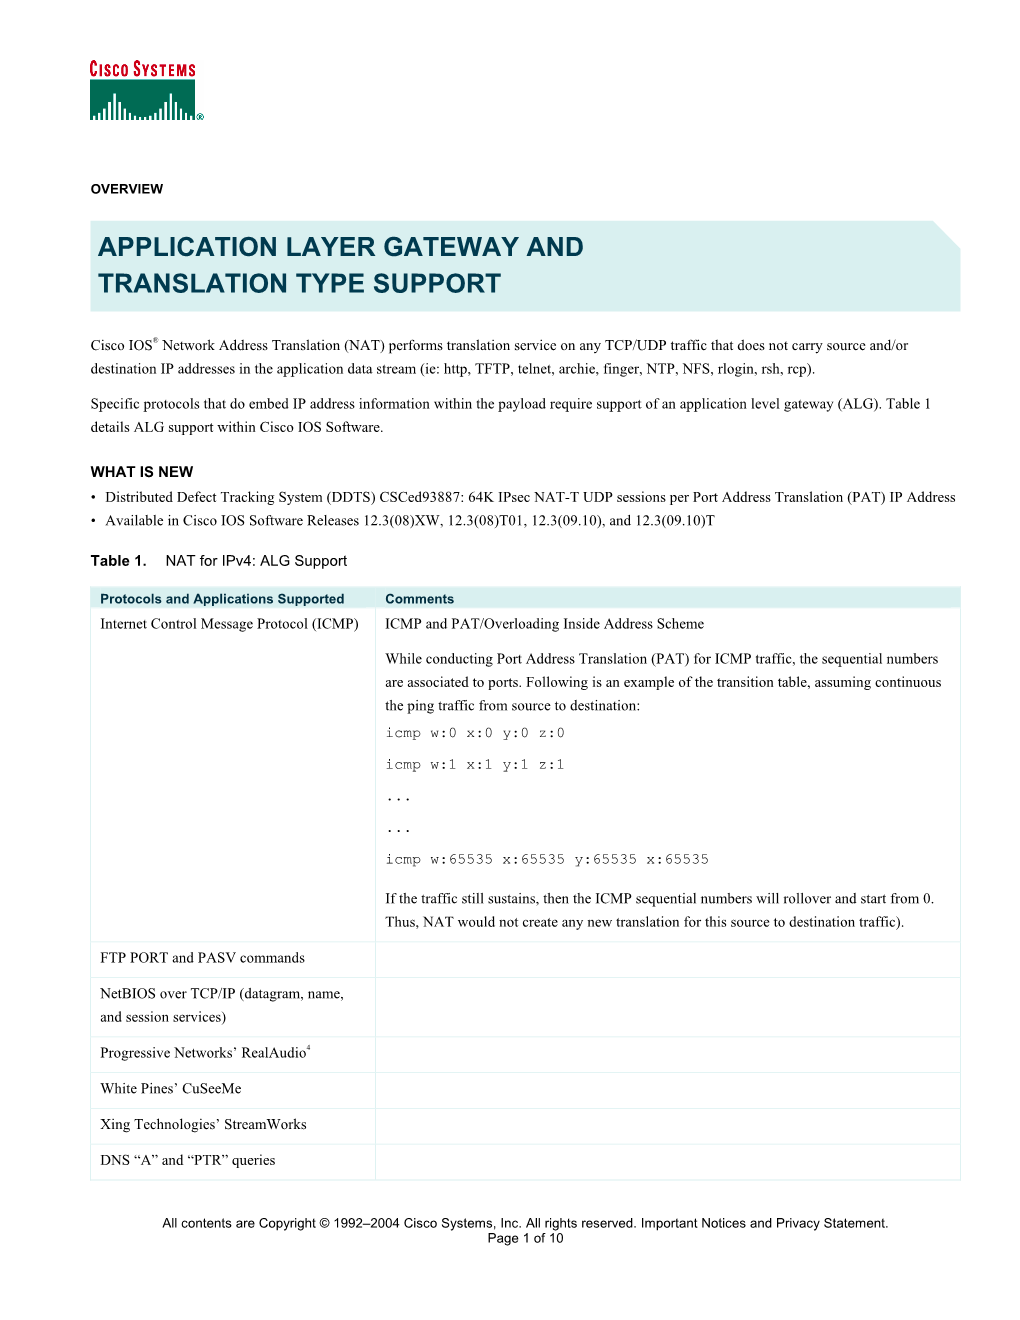 Application Layer Gateway and Translation Type Support